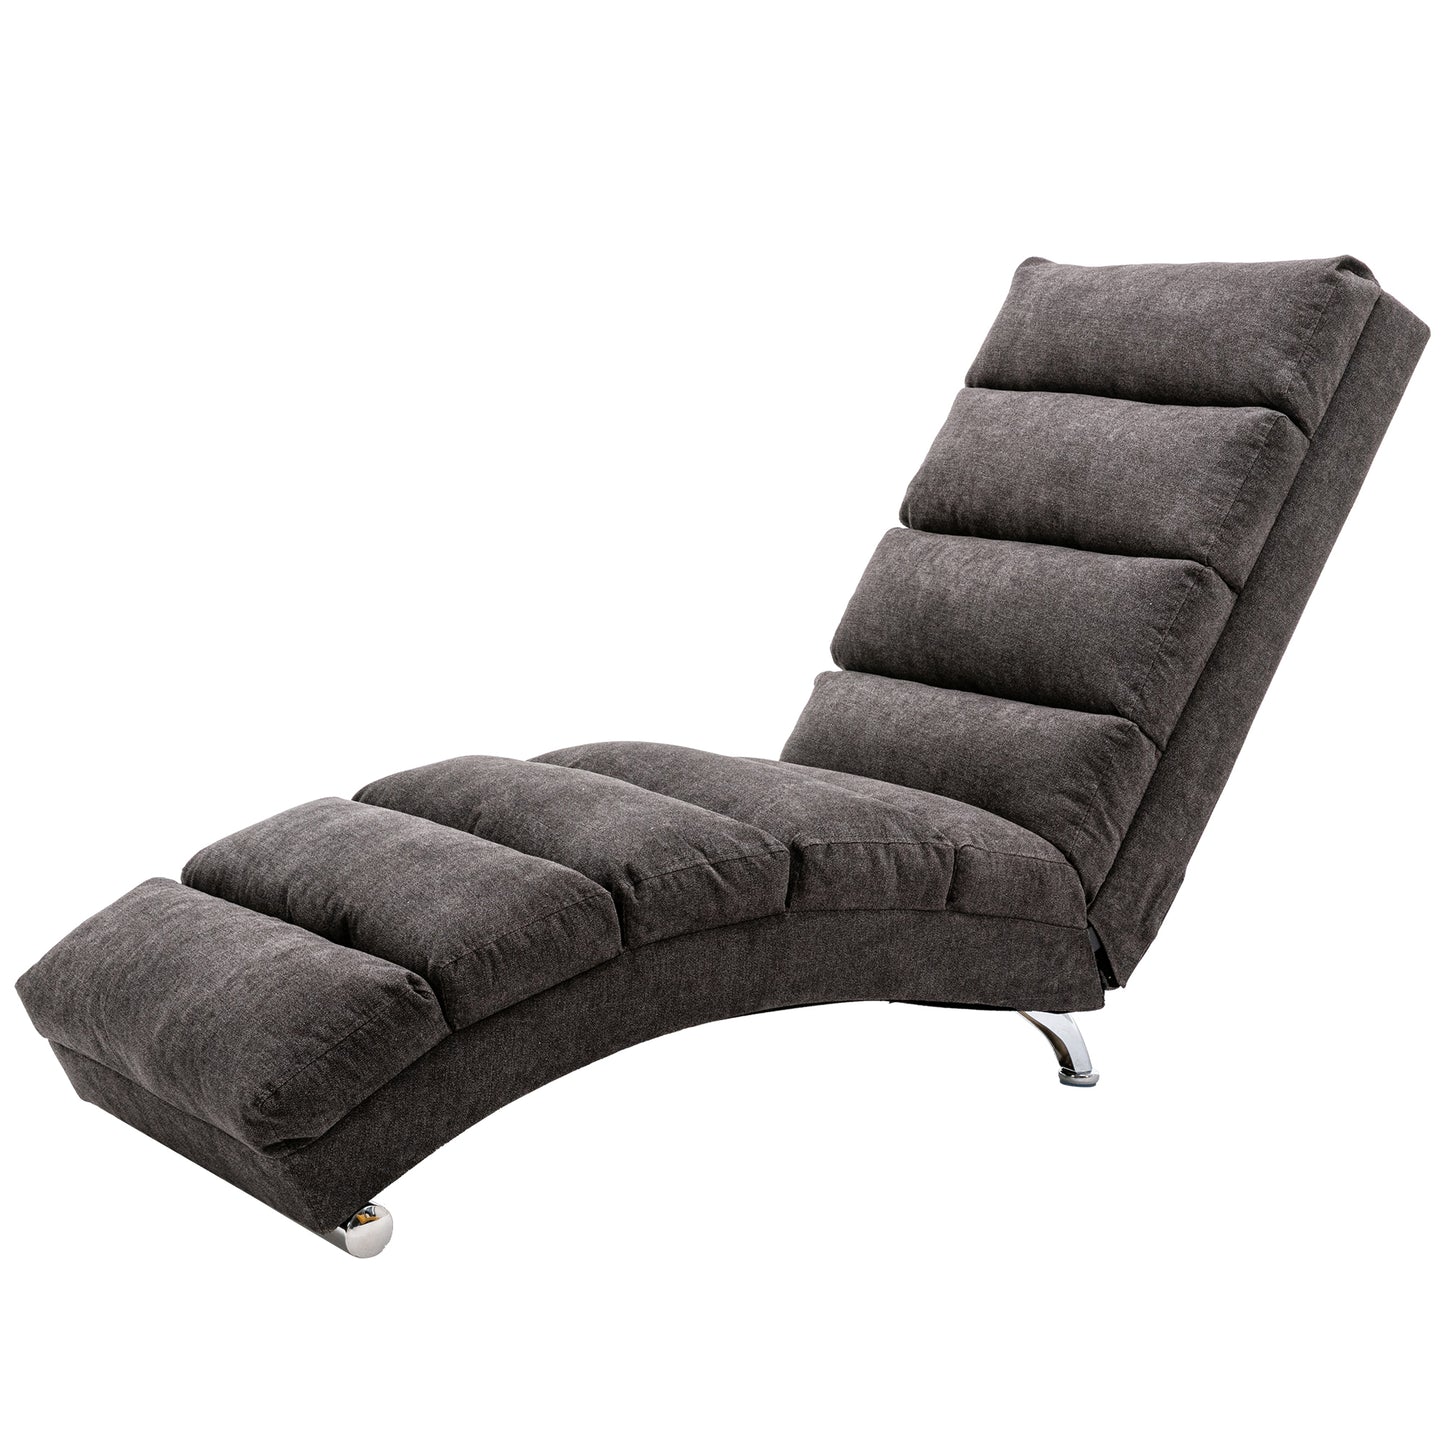 Modern Linen Chaise Lounge with Massage Function & Remote in Dark Gray